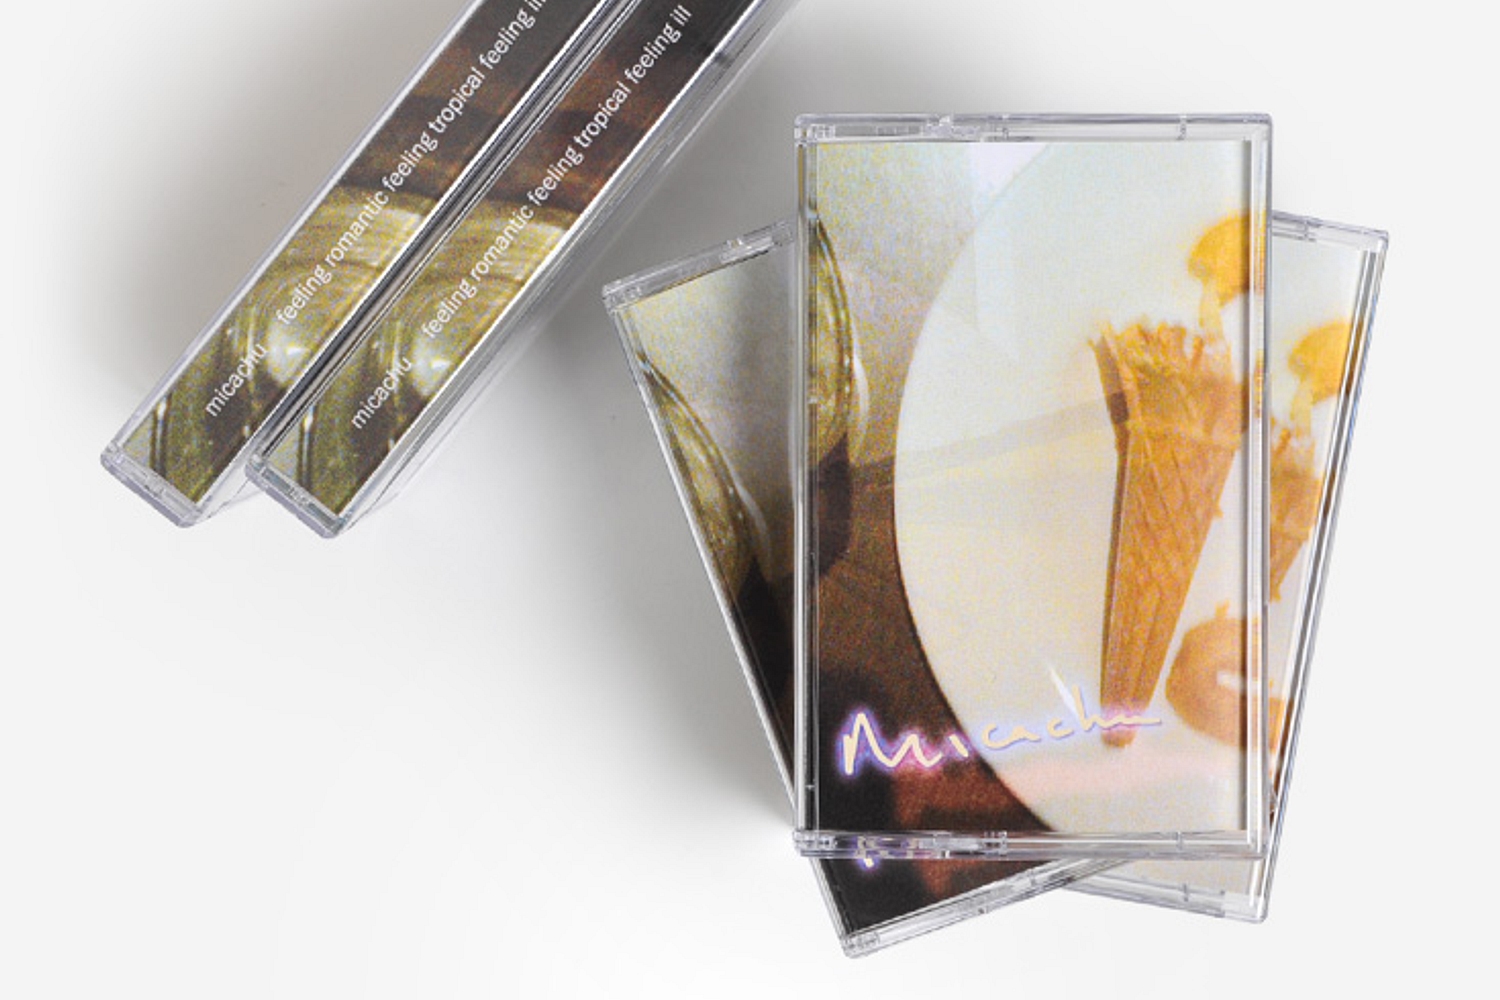 ​Micachu releases new cassette mix, ‘feeling romantic feeling tropical feeling ill’